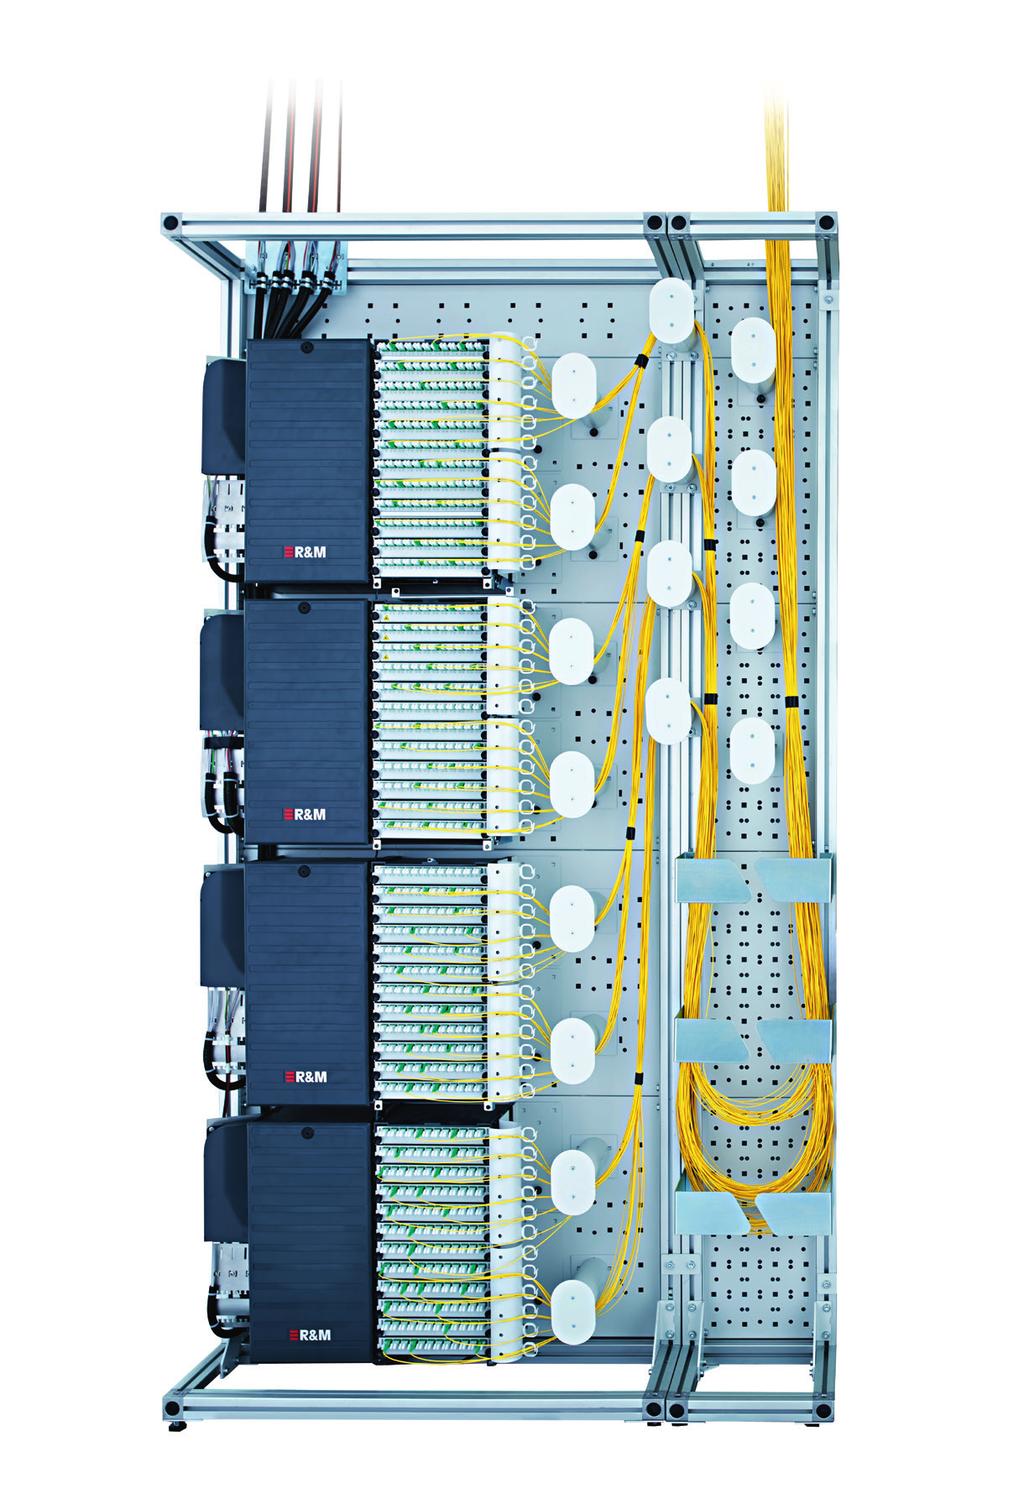 element Splitter-size independent acceptance High density up to 2304 fibers Bending radius R40 Subscriber management with SCM ETSI standard compliant Retrofittable side panels and door 090.